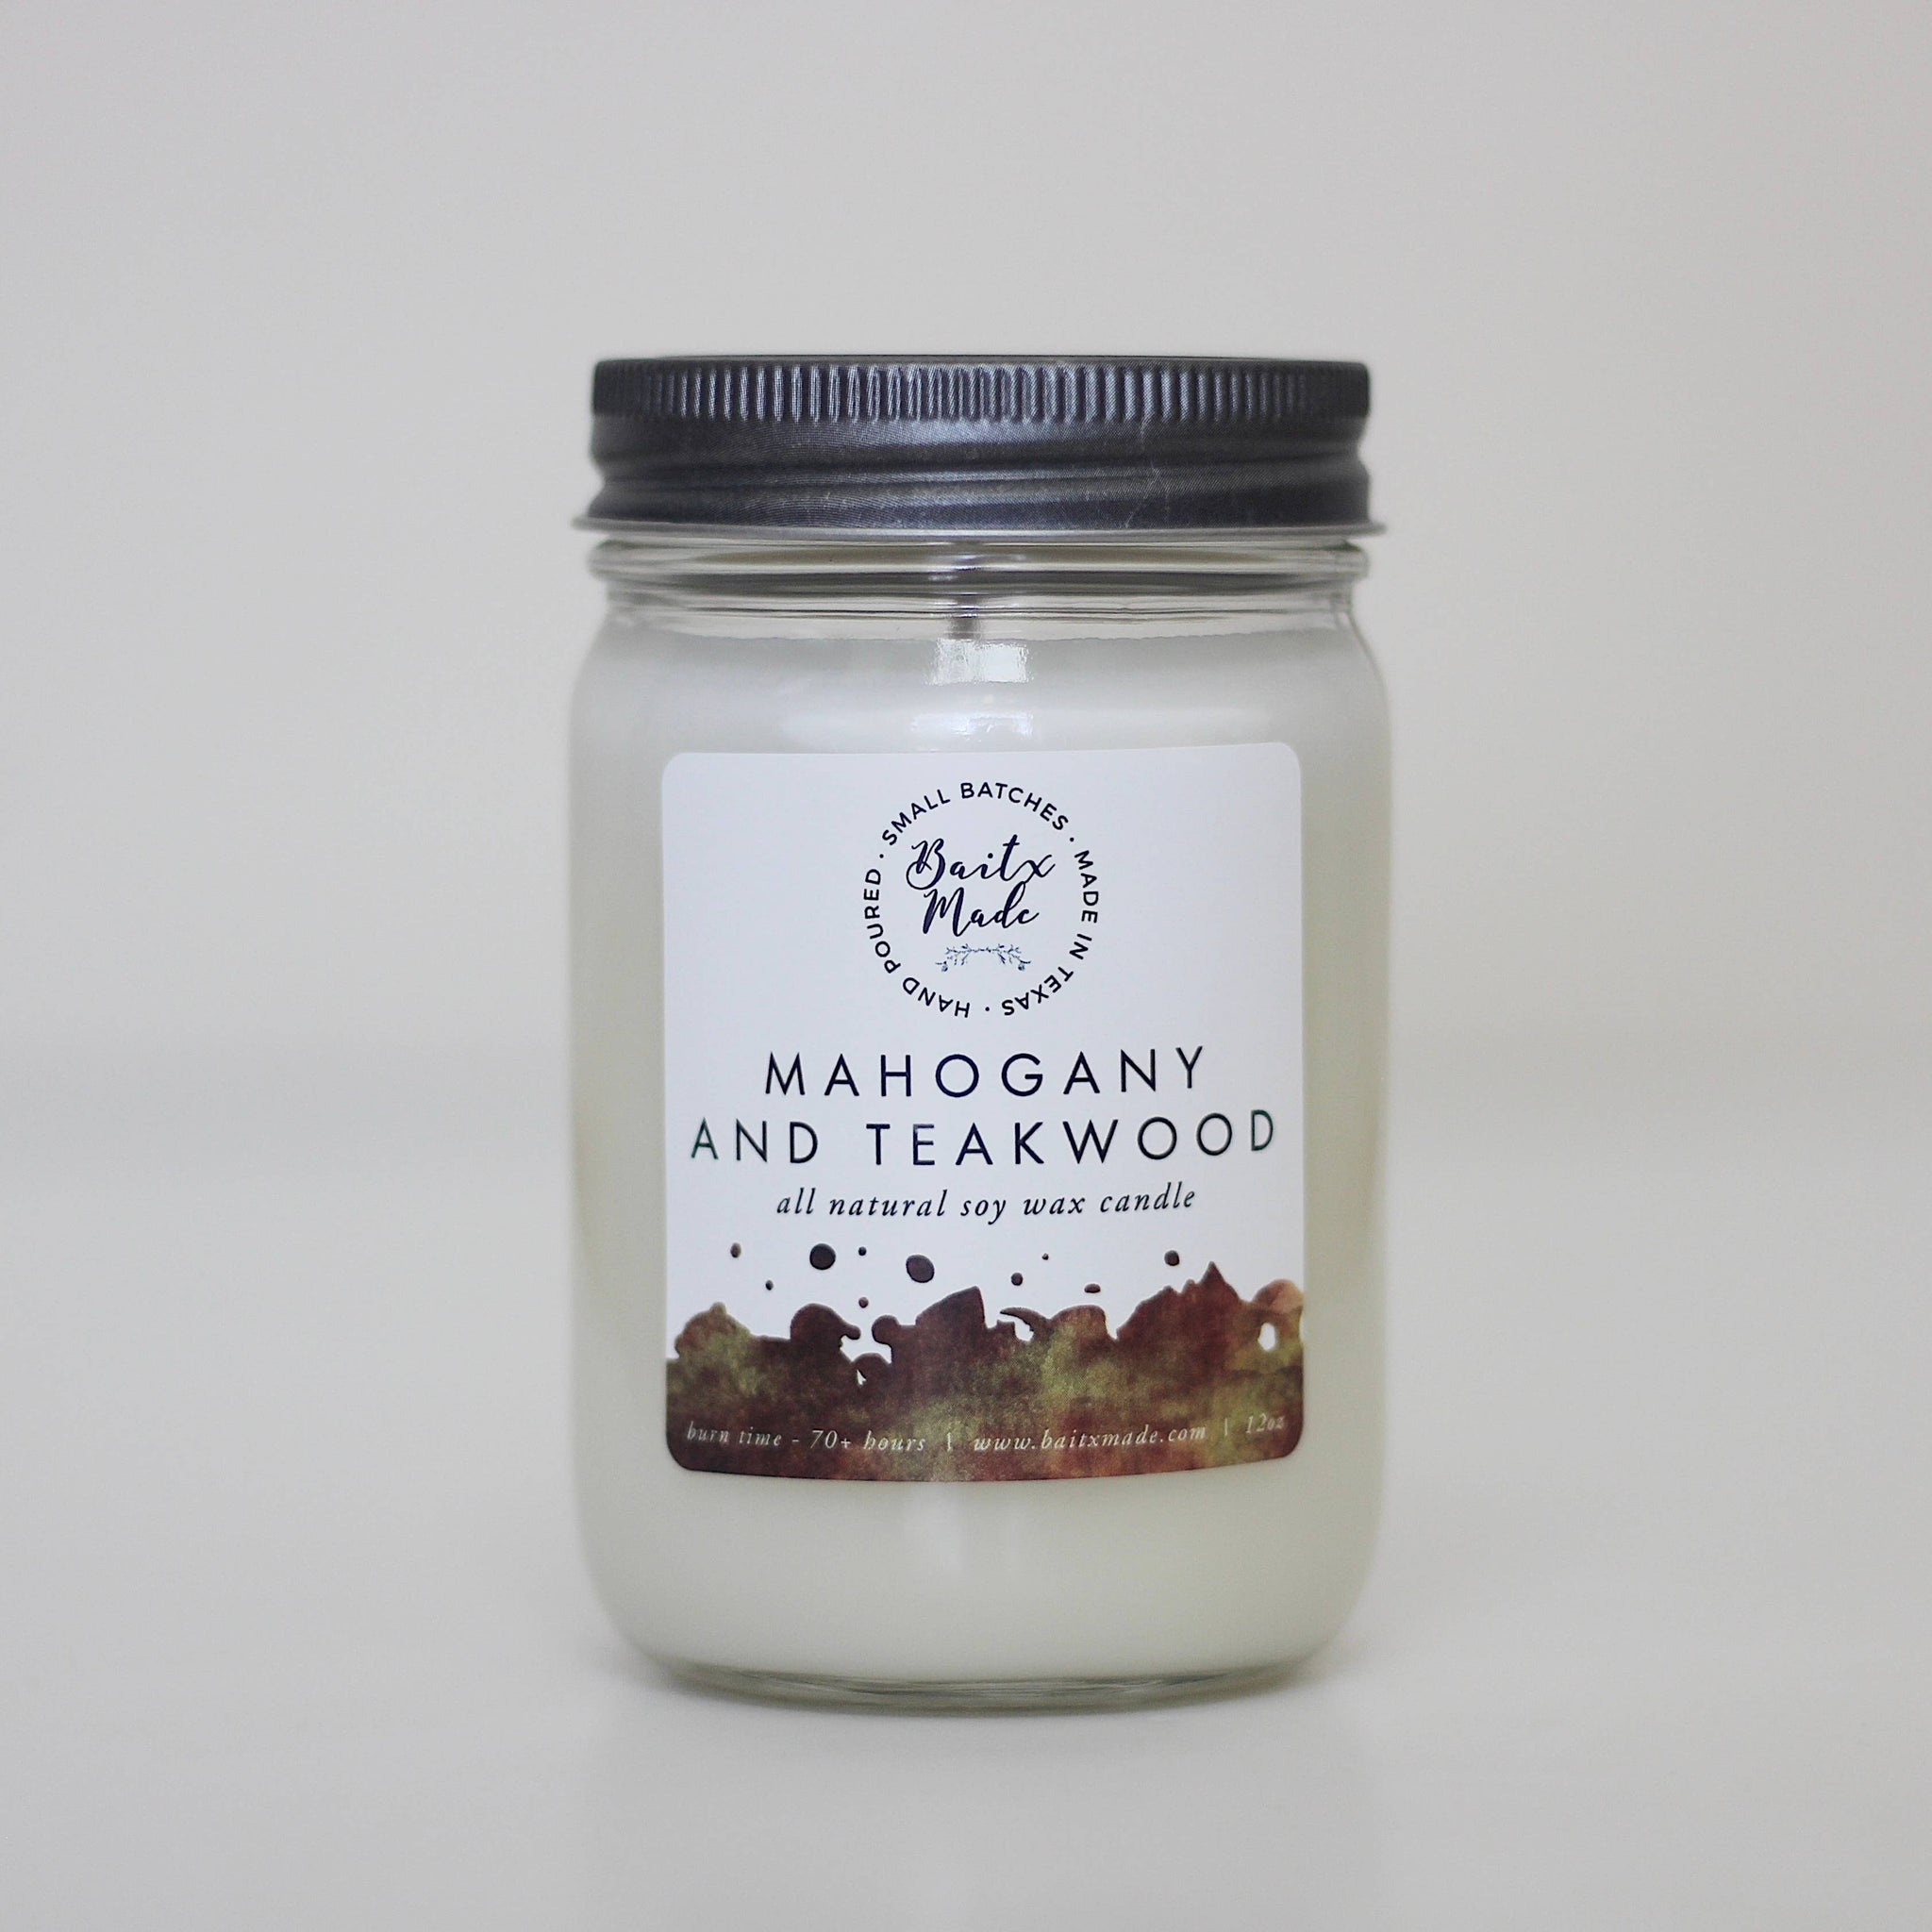 Mahogany and Teakwood Candle, 12 oz - Rise and Redemption